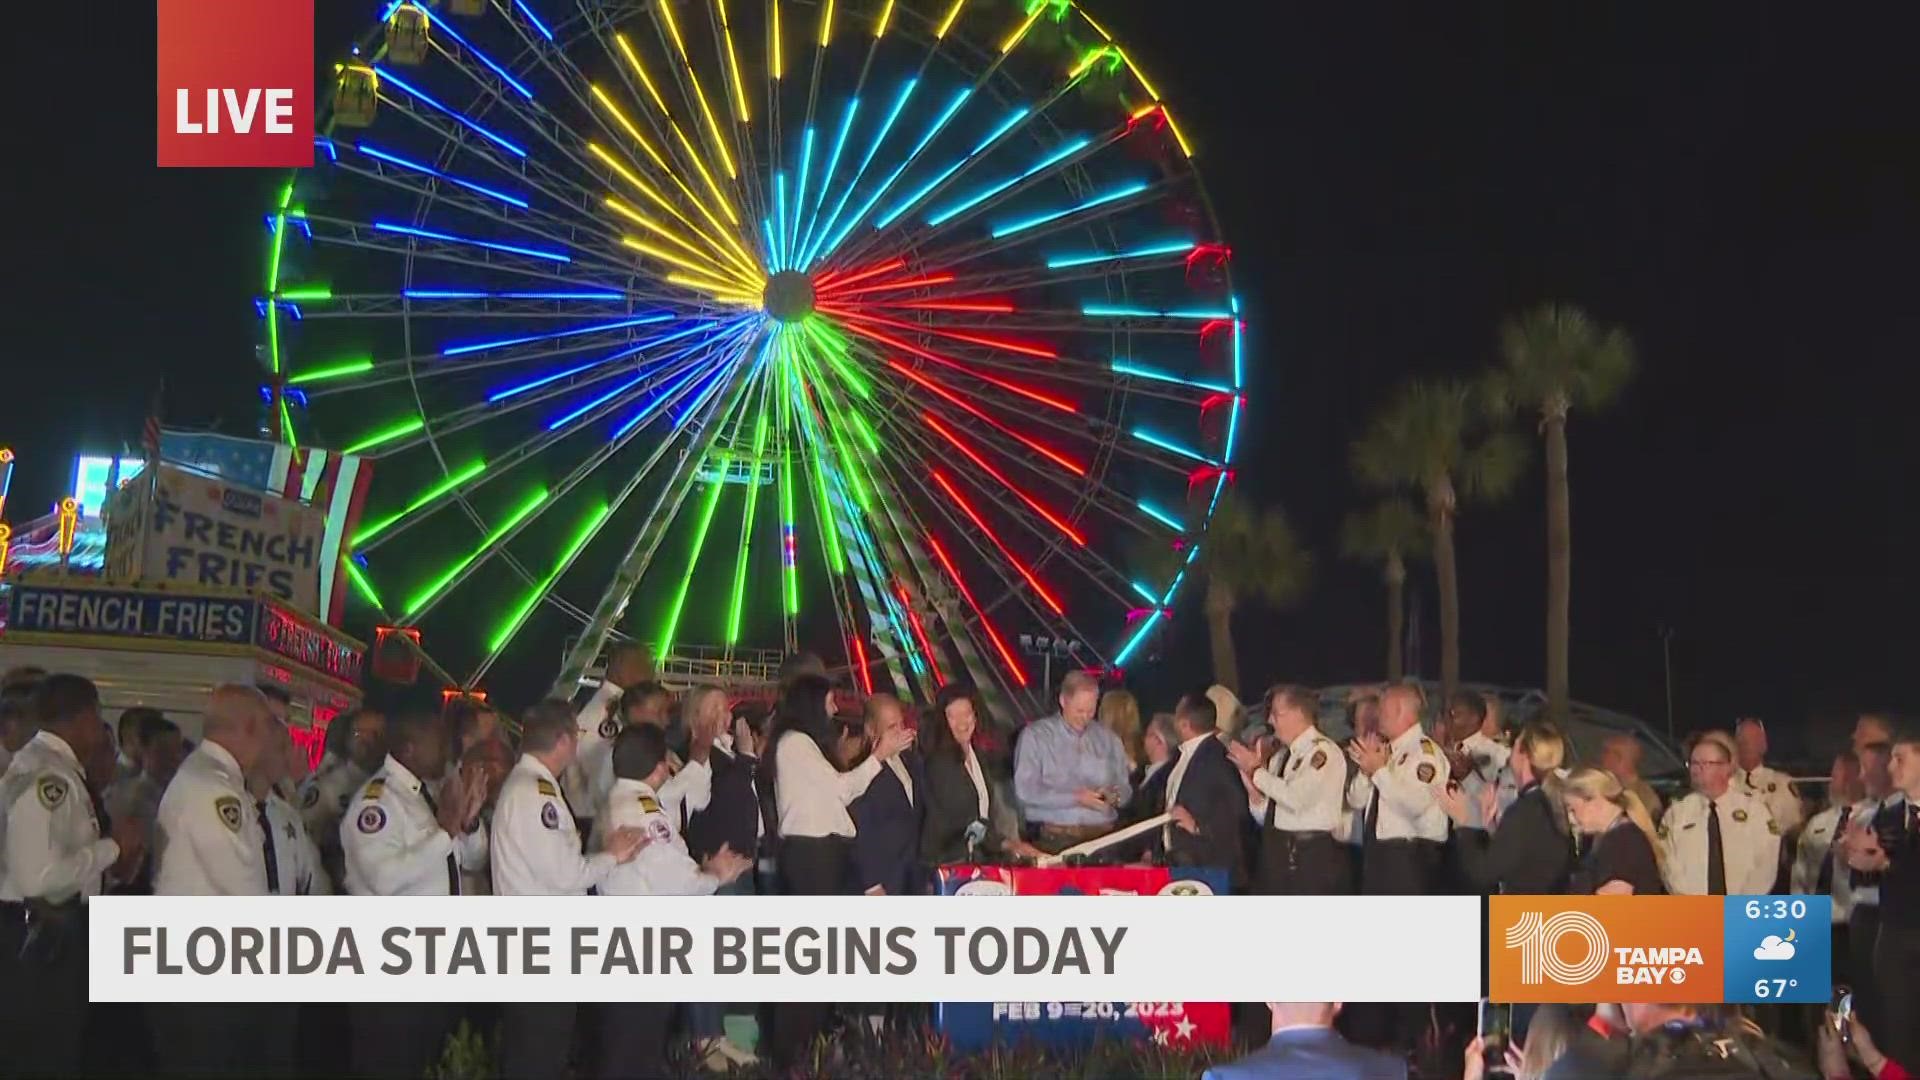 From fair food to rides to pig races, the Florida State Fair has something for everyone.